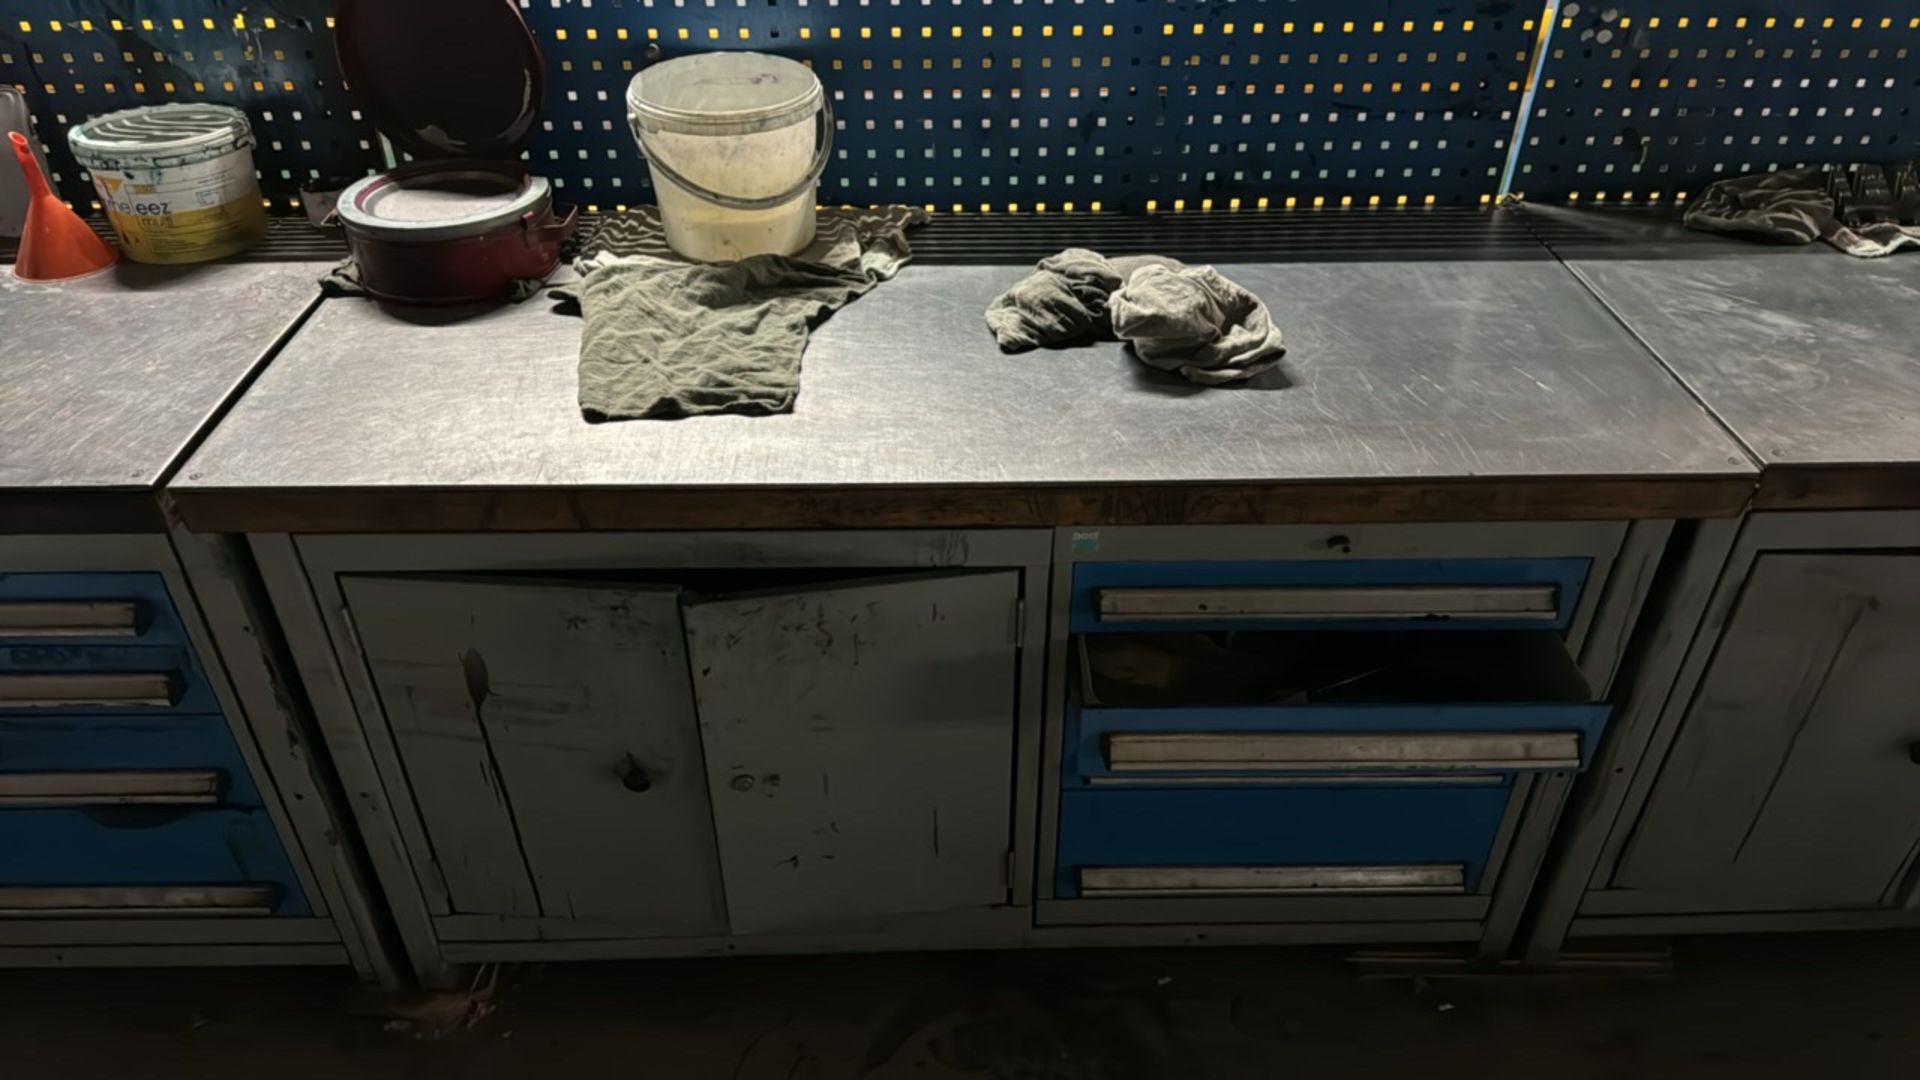 Blue Metal Work Bench with Storage - Image 2 of 3